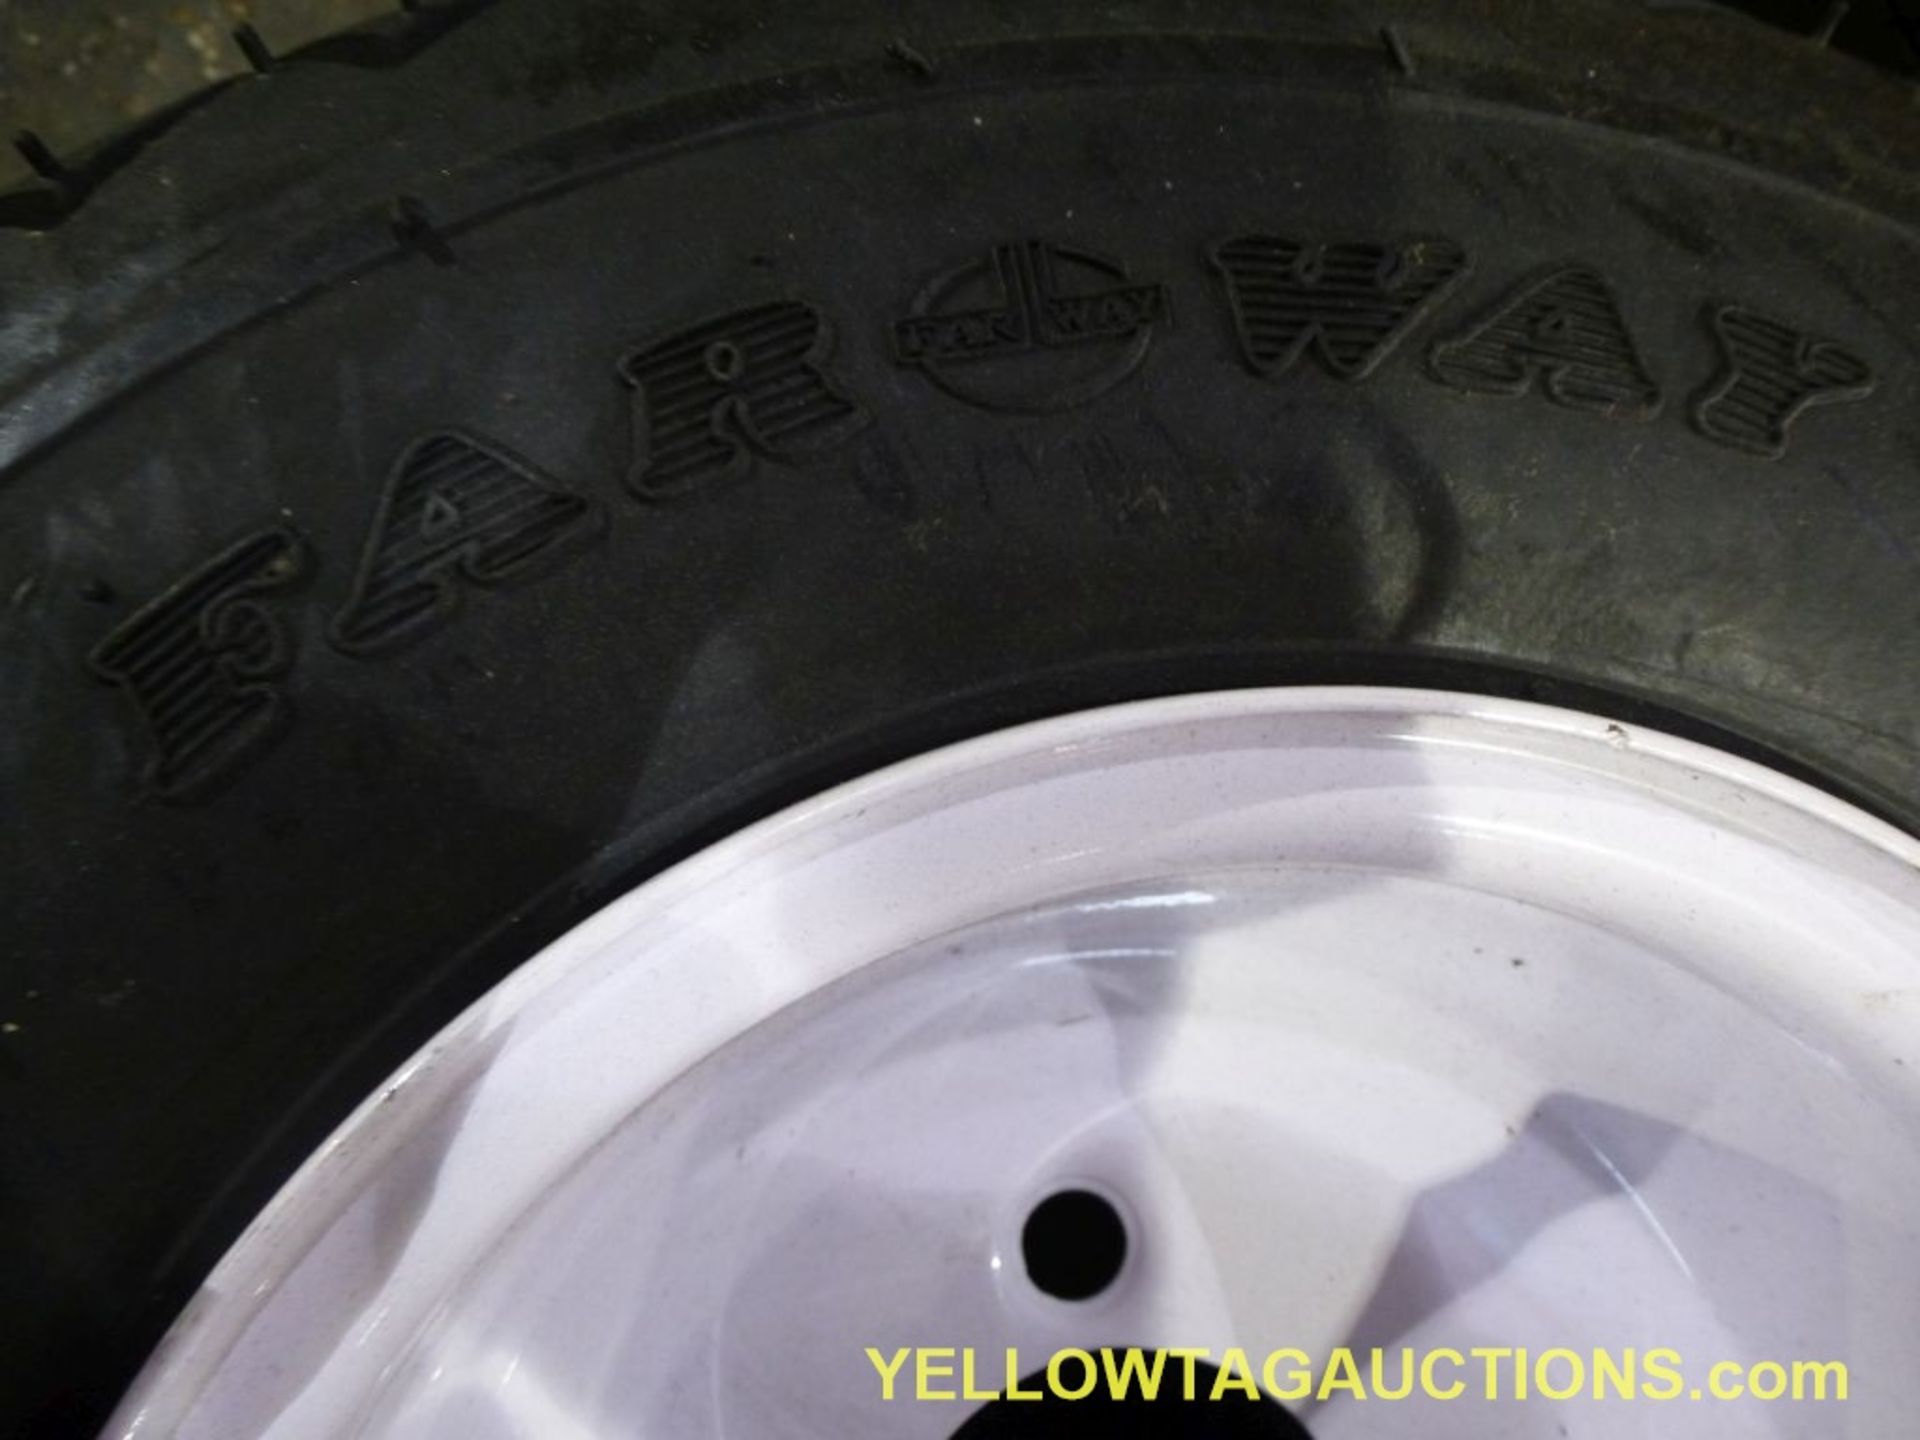 Lot of (12) FarWay 6-Ply Nylon Tires & Wheels|18 X 8.50 - 8NHS|Tag: 447 - Image 3 of 8